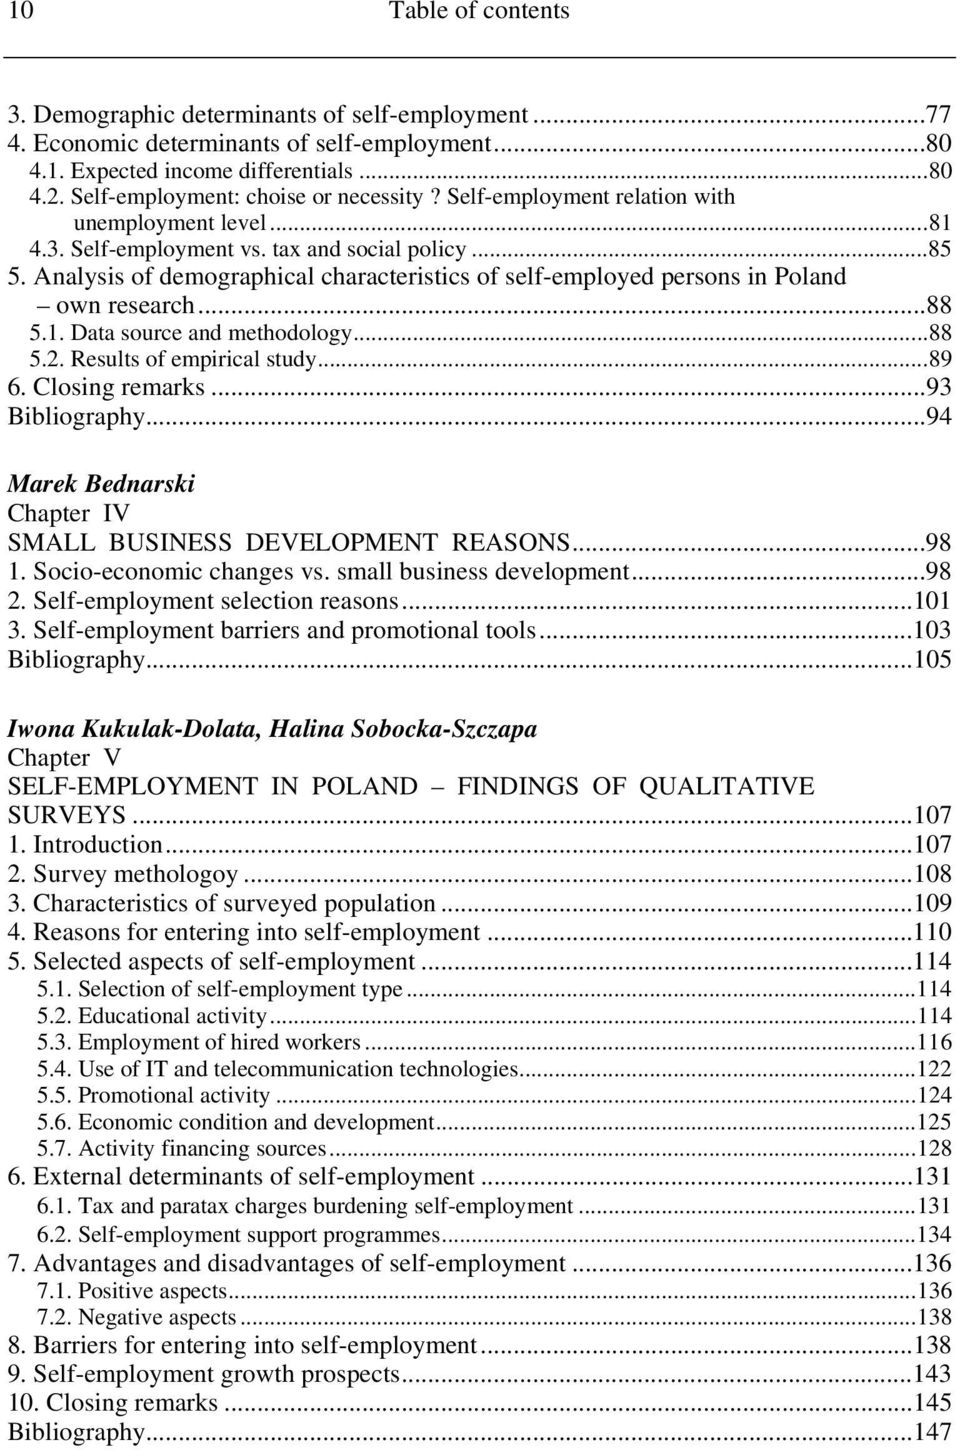 Analysis of demographical characteristics of self-employed persons in Poland own research...88 5.1. Data source and methodology...88 5.2. Results of empirical study...89 6. Closing remarks.